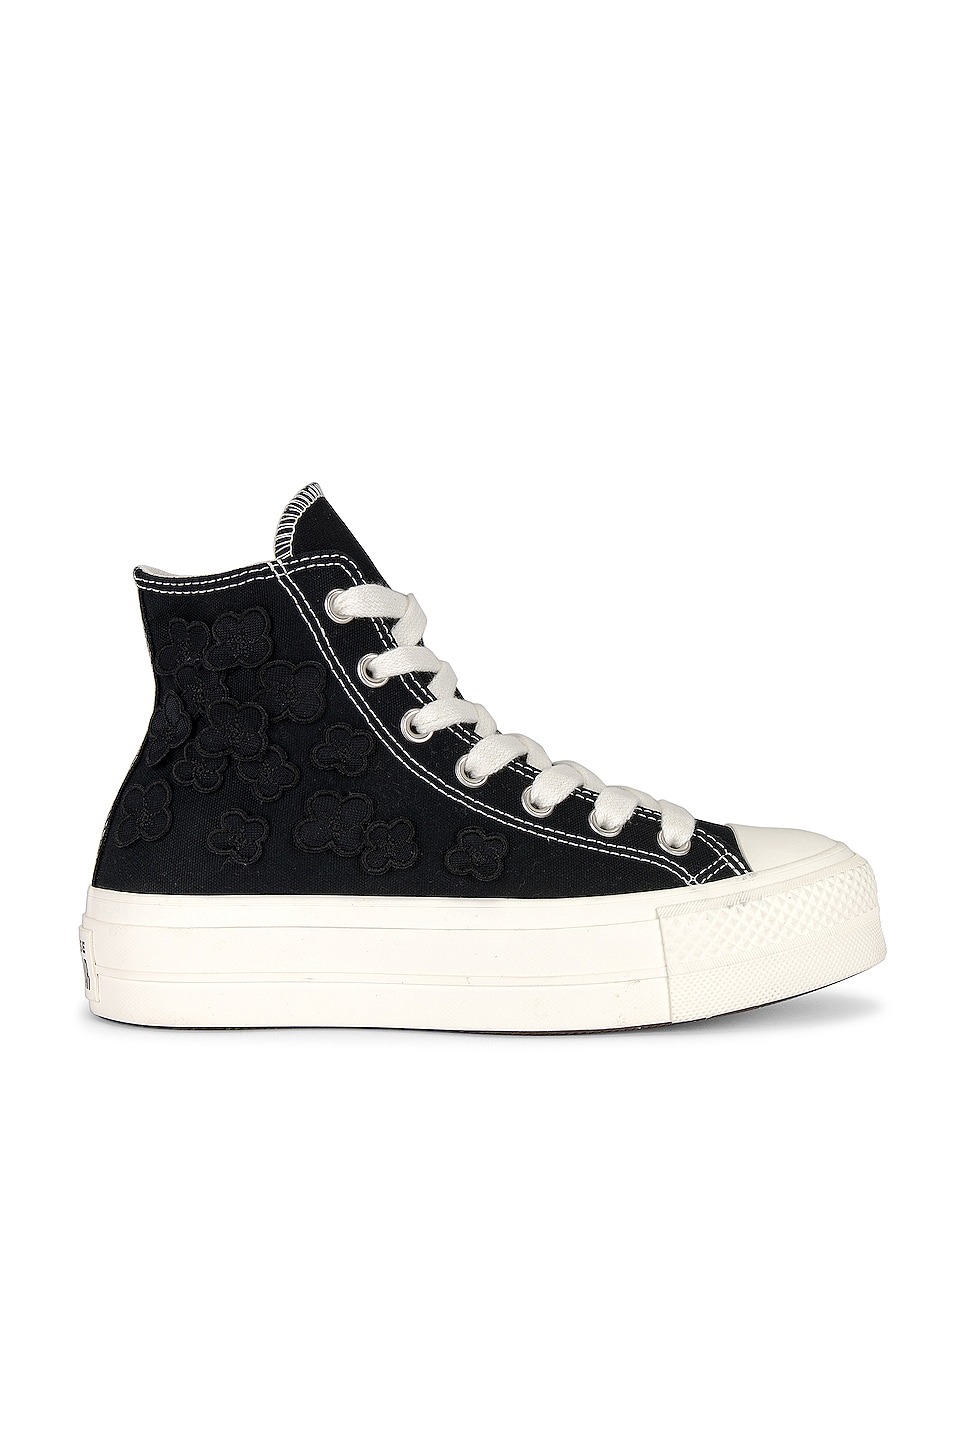 Image 1 of Converse Ctas Lift Greenhouse in Black